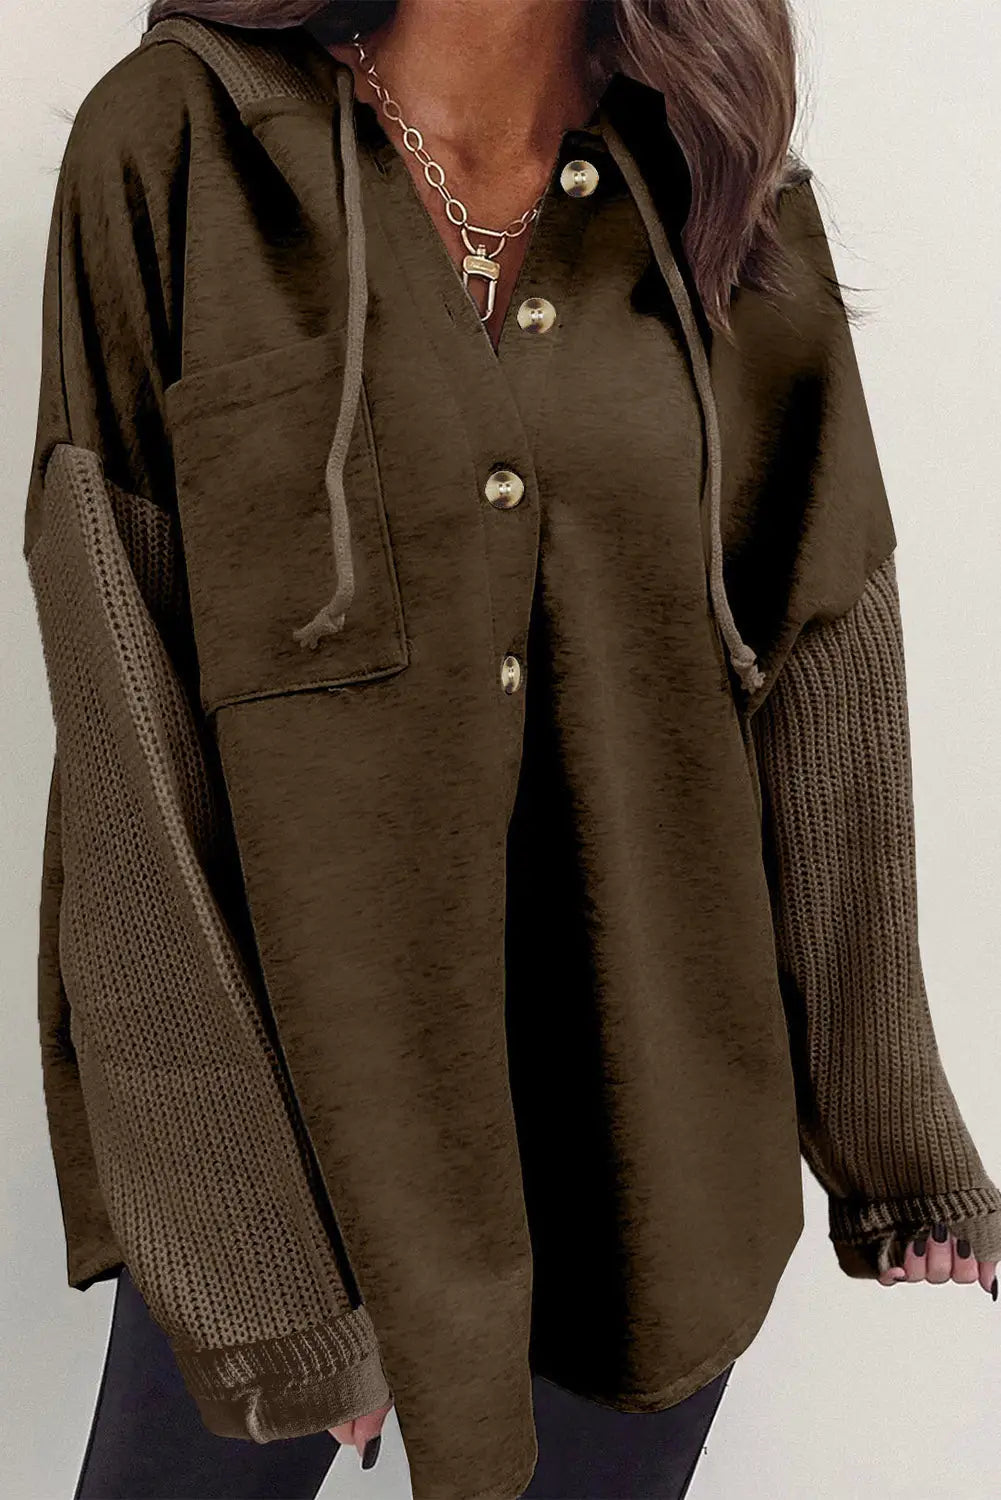 Gold flame button up contrast knitted sleeves hooded jacket - dark brown / 2xl / 80% polyester + 20% cotton - outerwear